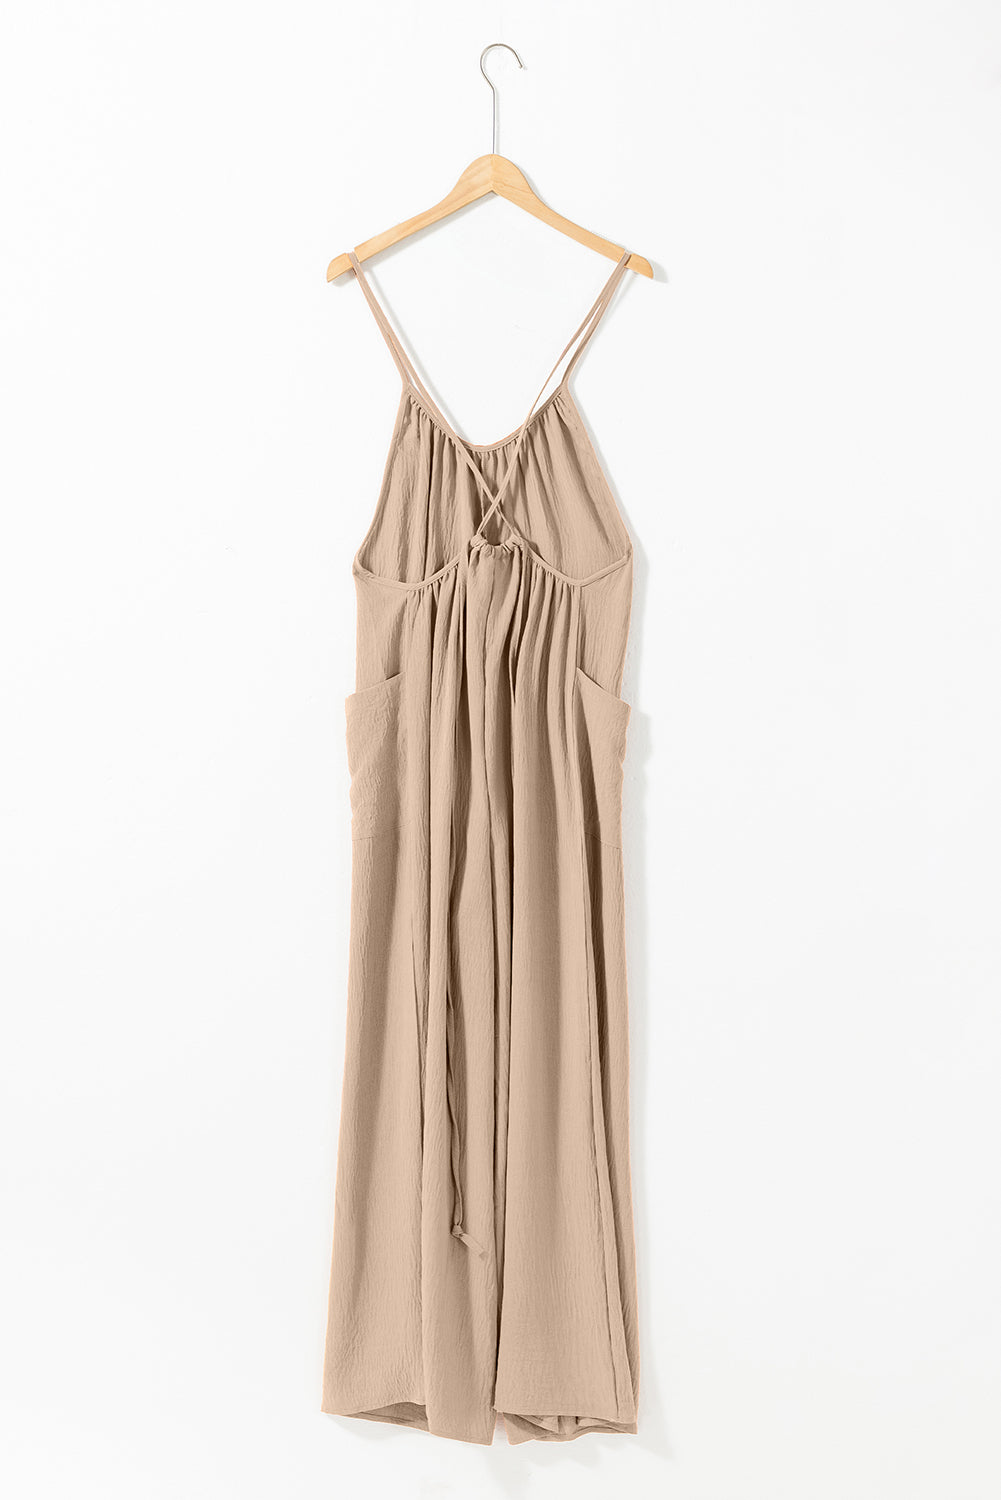 Apricot Spaghetti Straps Waist Tie Pocketed Wide Leg Jumpsuit